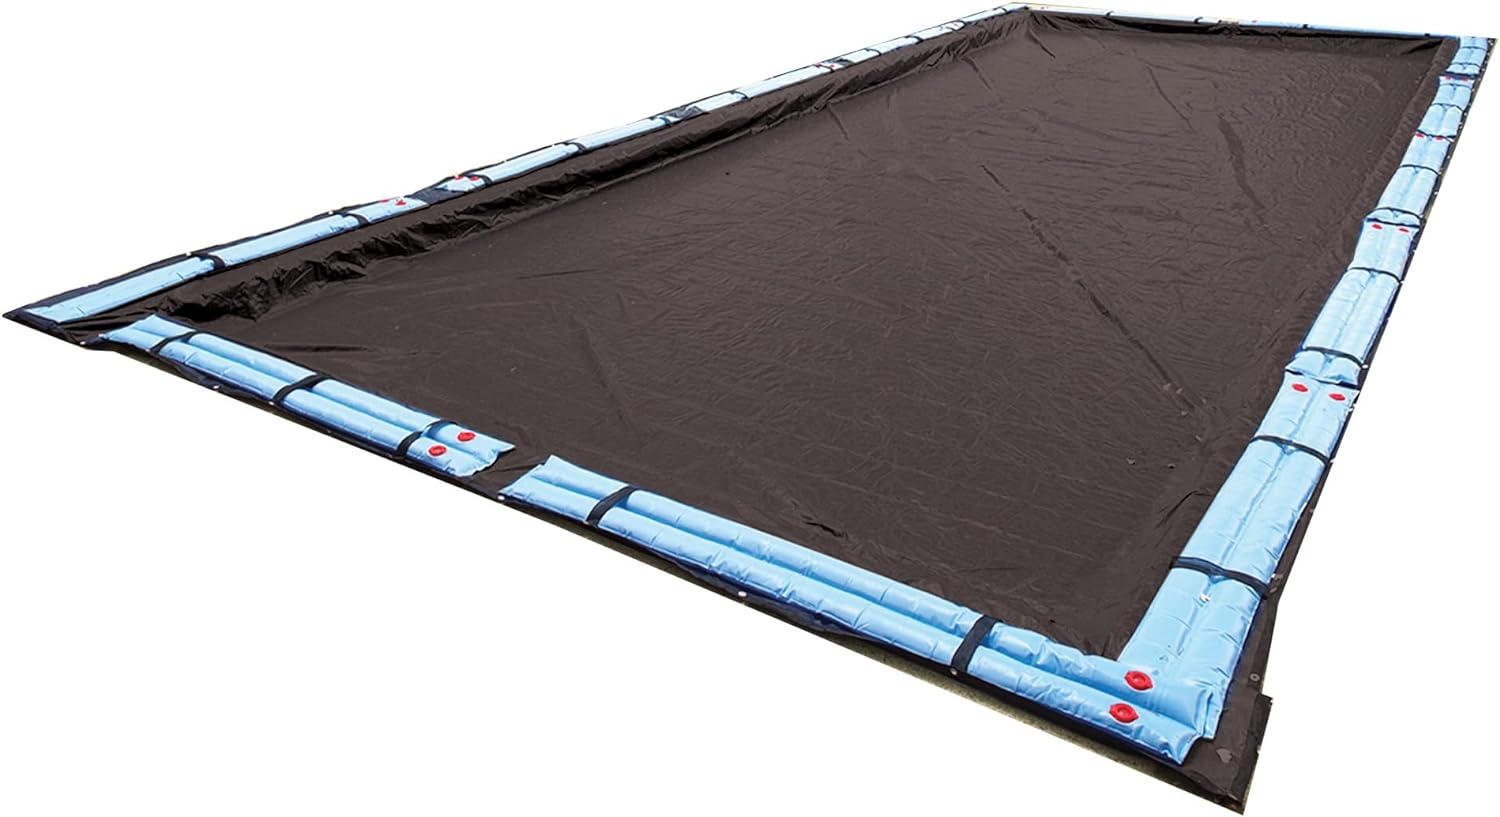 Royal 18' x 40' Pool Size - 23' x 45' Rect. Cover 10 Year Warranty